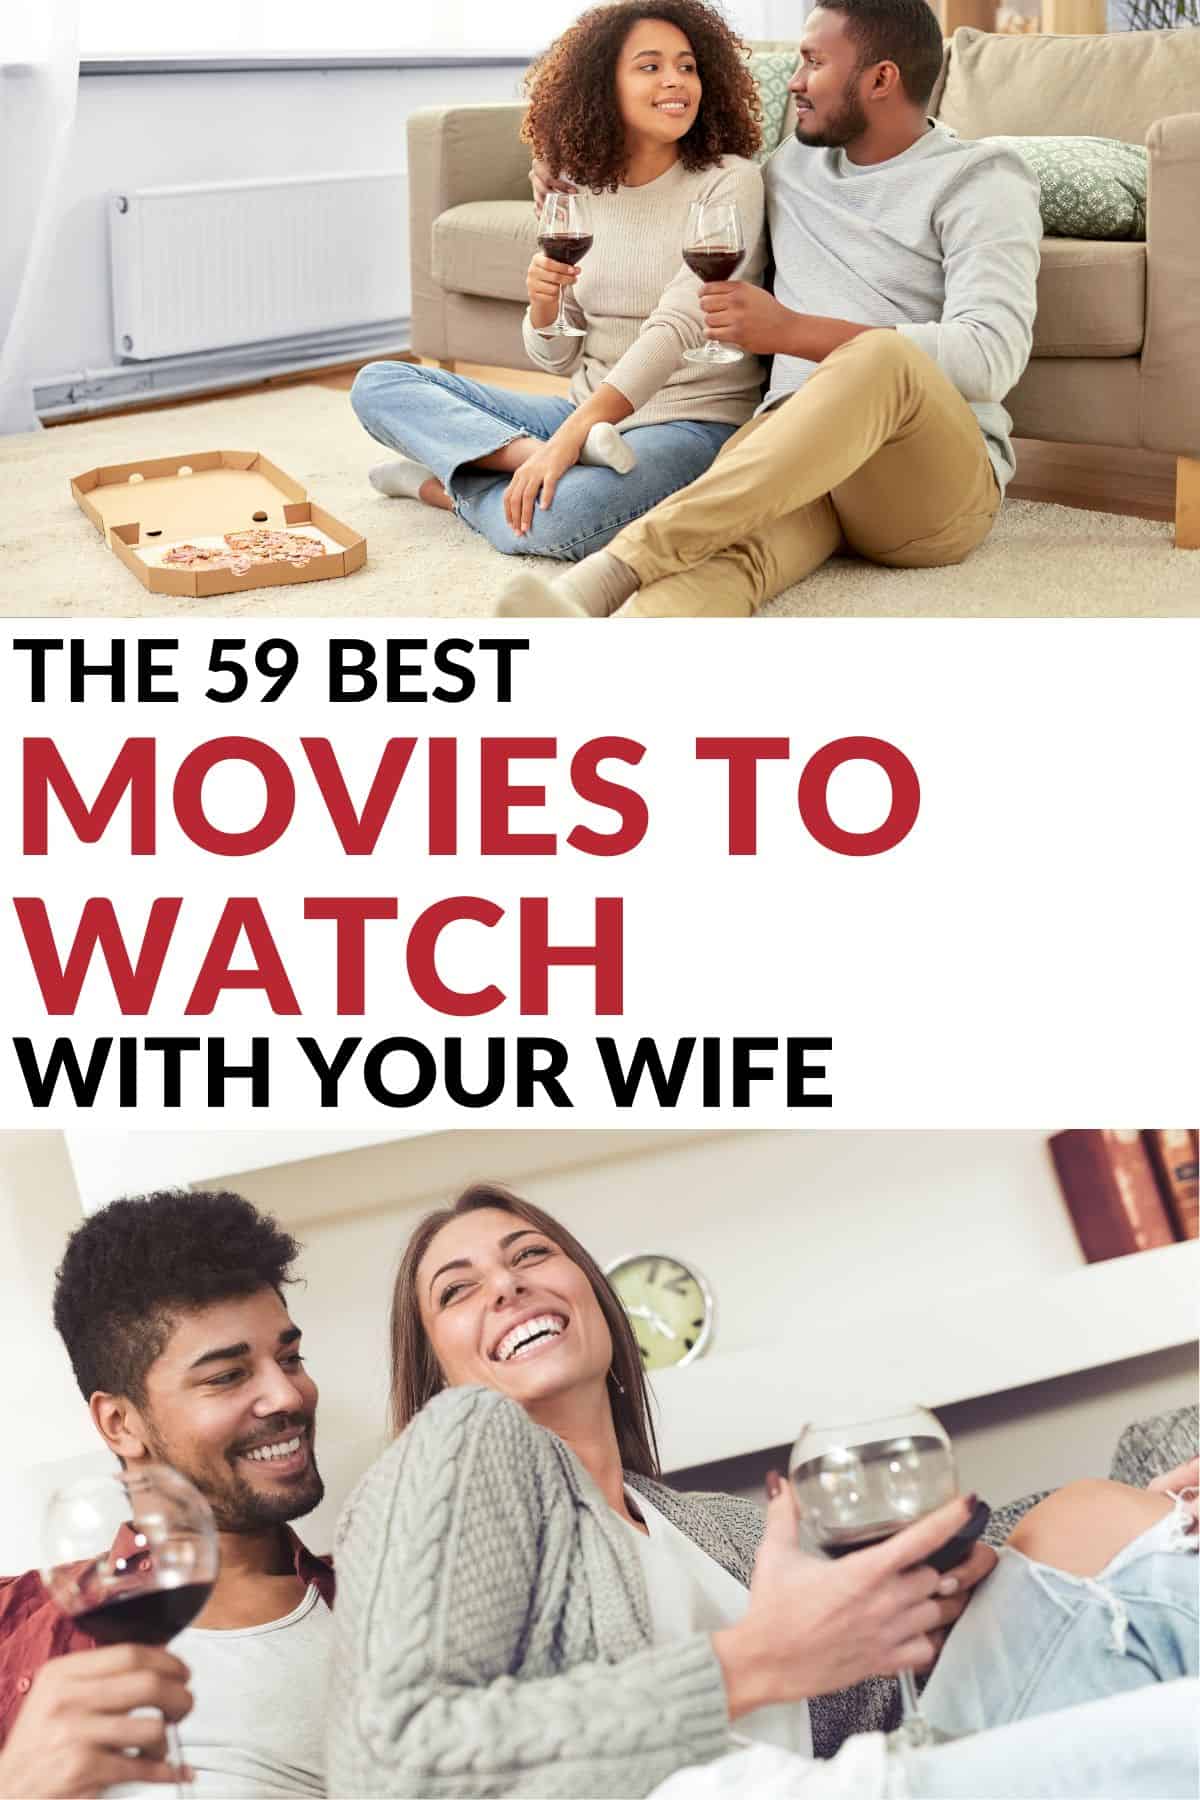 collage of 2 different couples enjoying time together at home - text overlay in the middle says the 59 best movies to watch with your wife